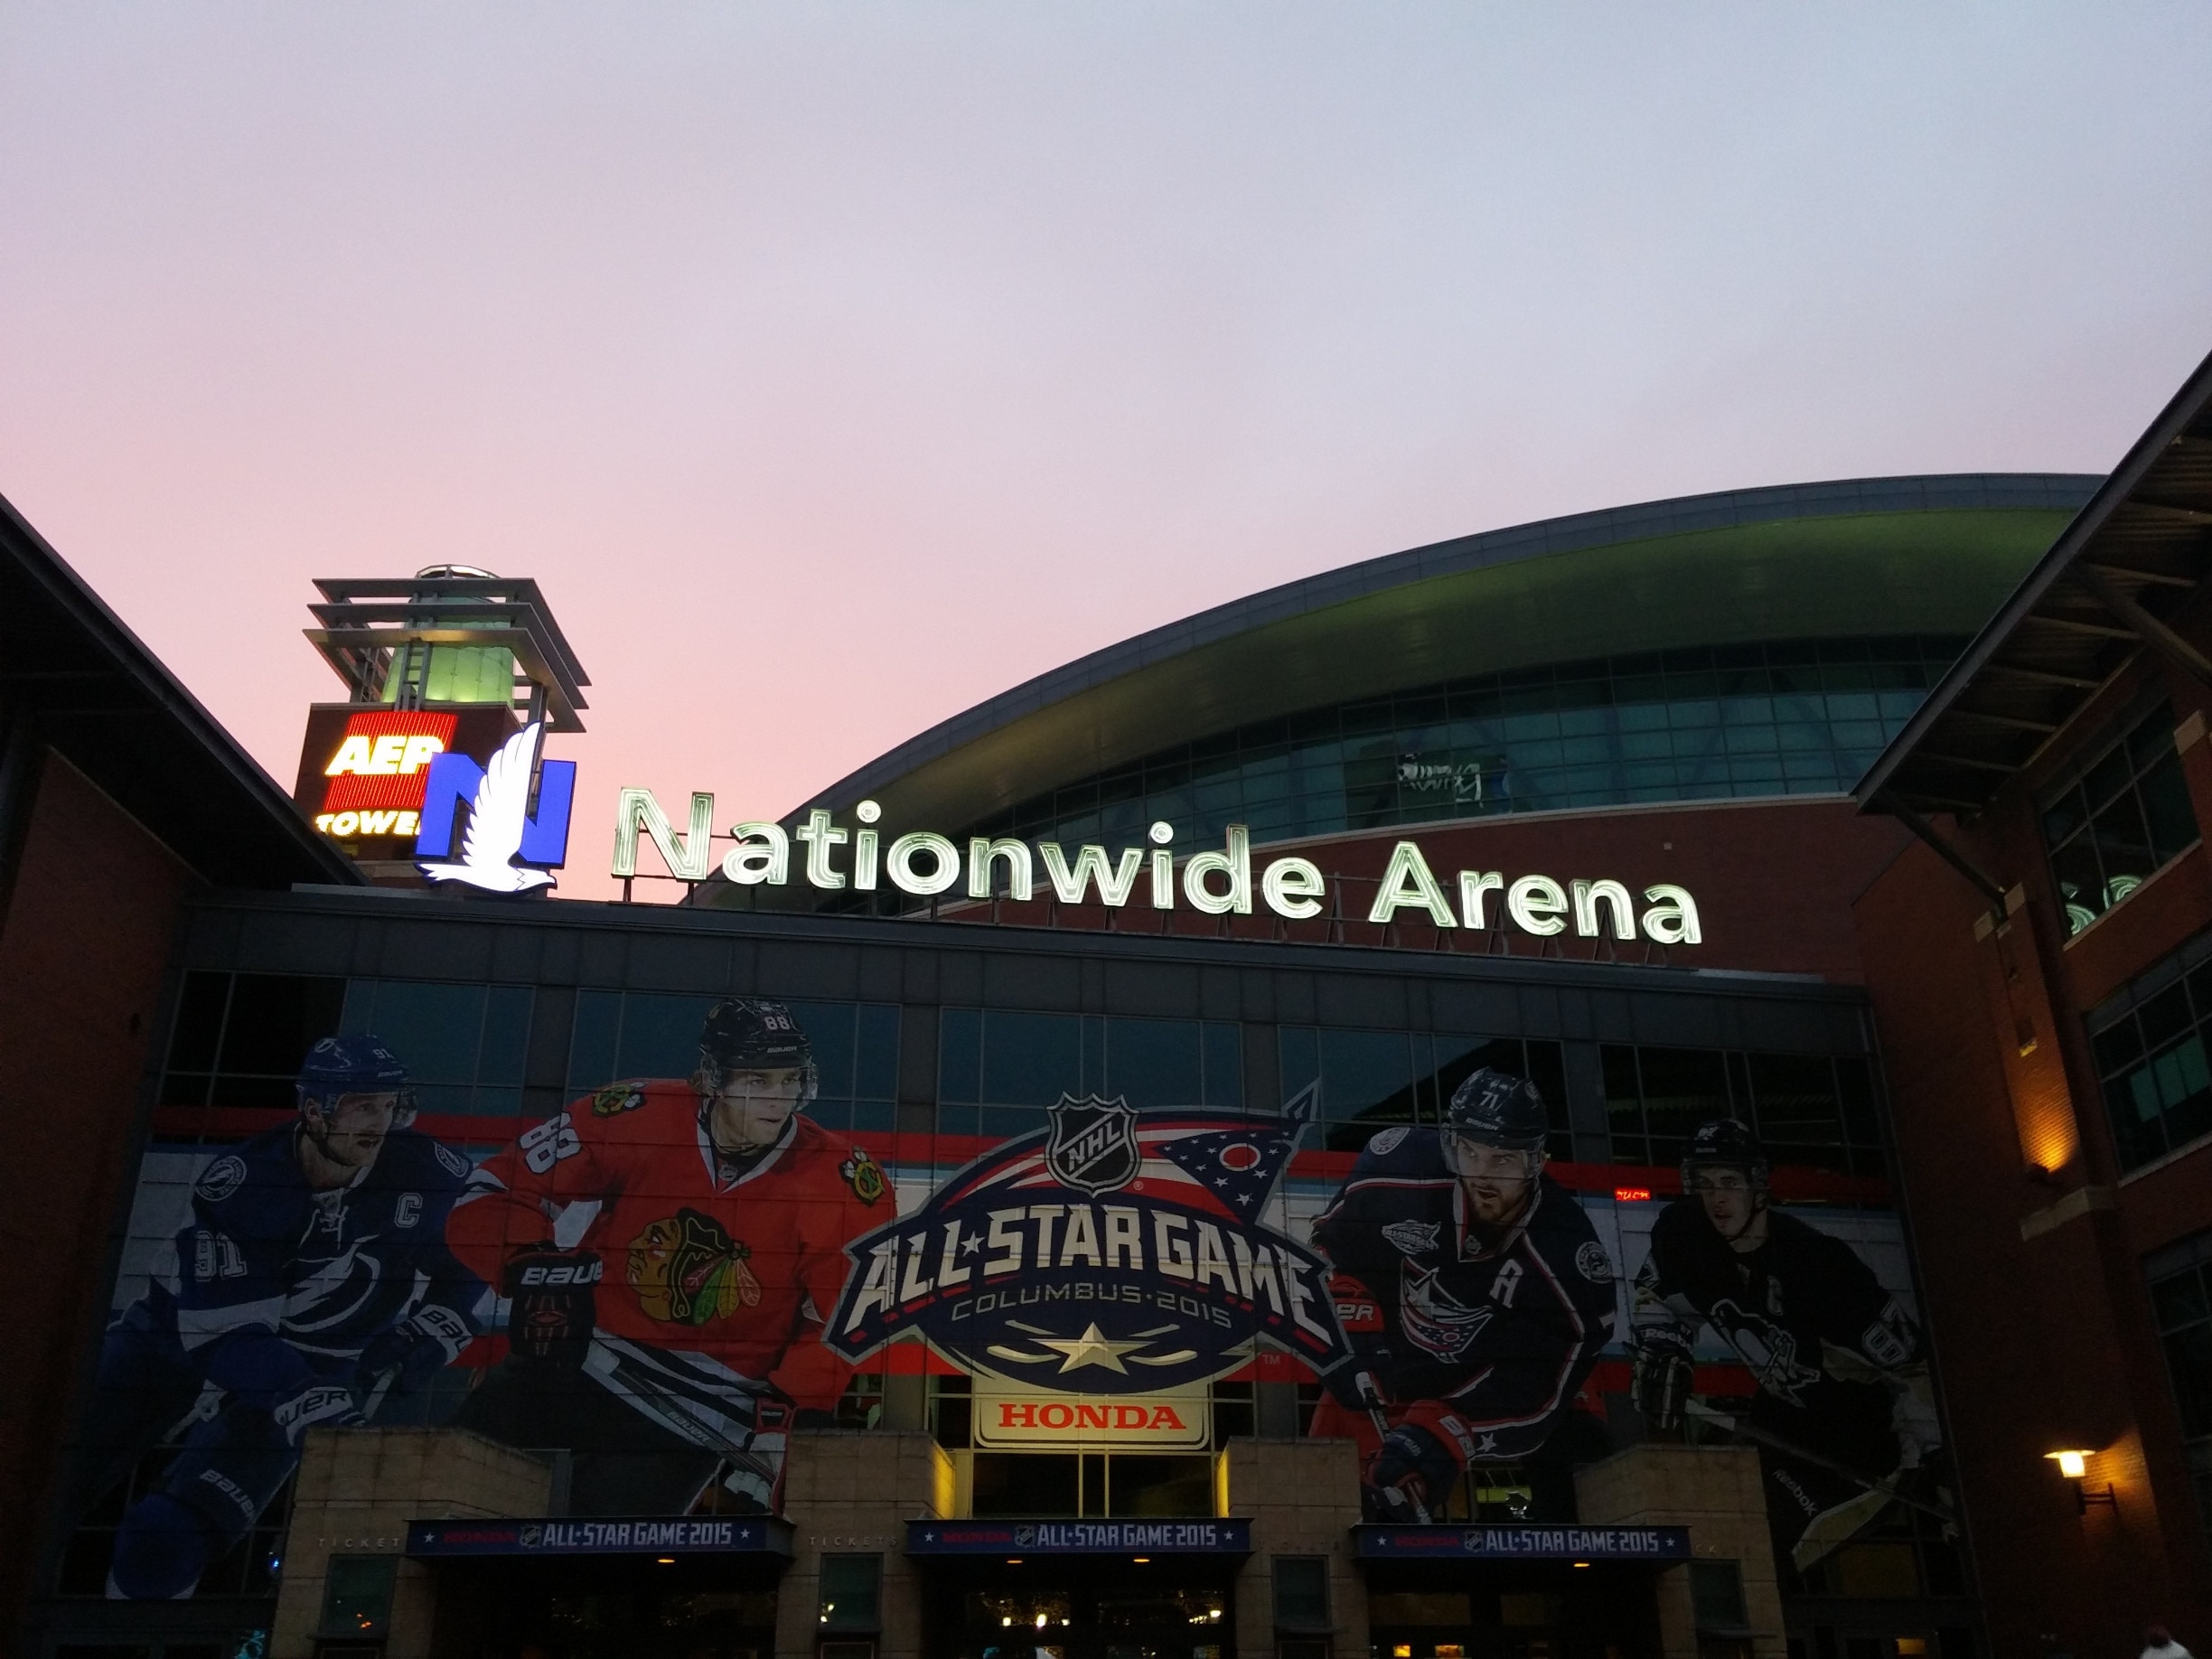 The Columbus Blue Jackets #CBJ and Nationwide Arena went all out as hosts of the 2014 NHL All-star Game. In addition to hosting the skills competition and the game itself, the NHL fan festival was held at the nearby convention center and the Arena District was turned into All Star Winter Park with a giant snow slide and an outdoor NHL regulation sized ice rink.